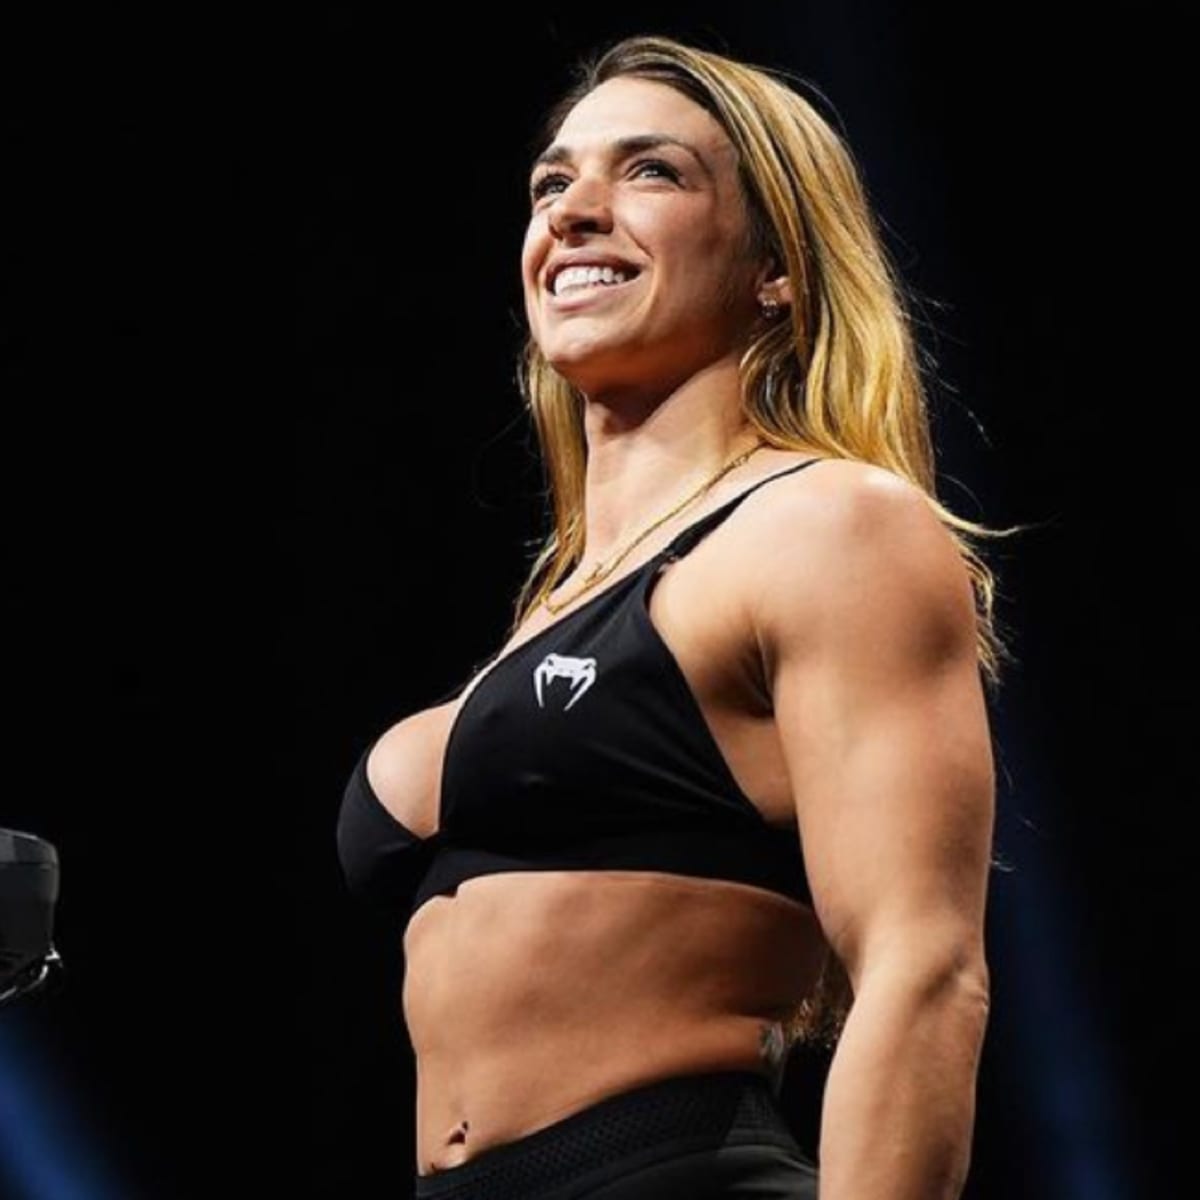 Meet stunning Mackenzie Dern who is set to take the UFC by storm